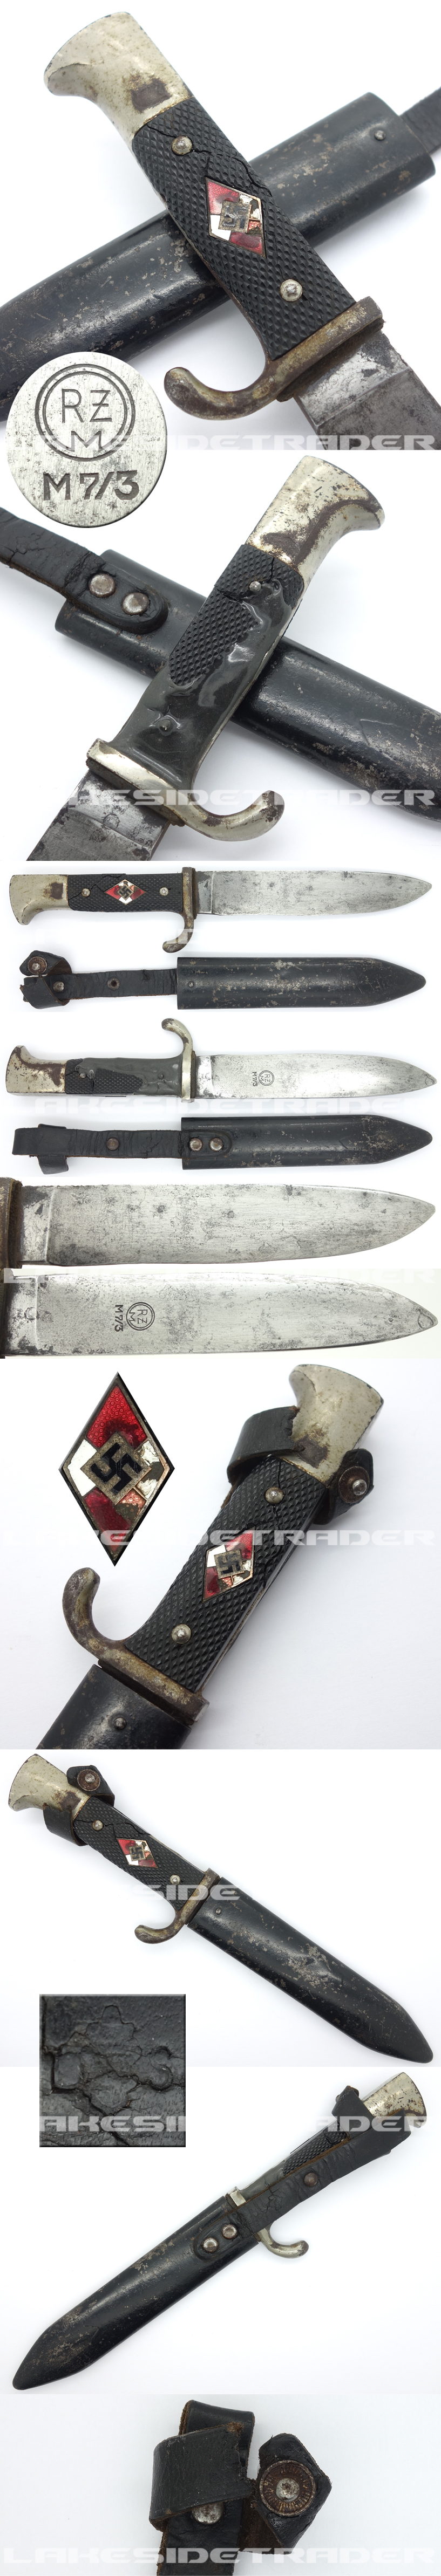 Hitler Youth Knife by RZM M7/3